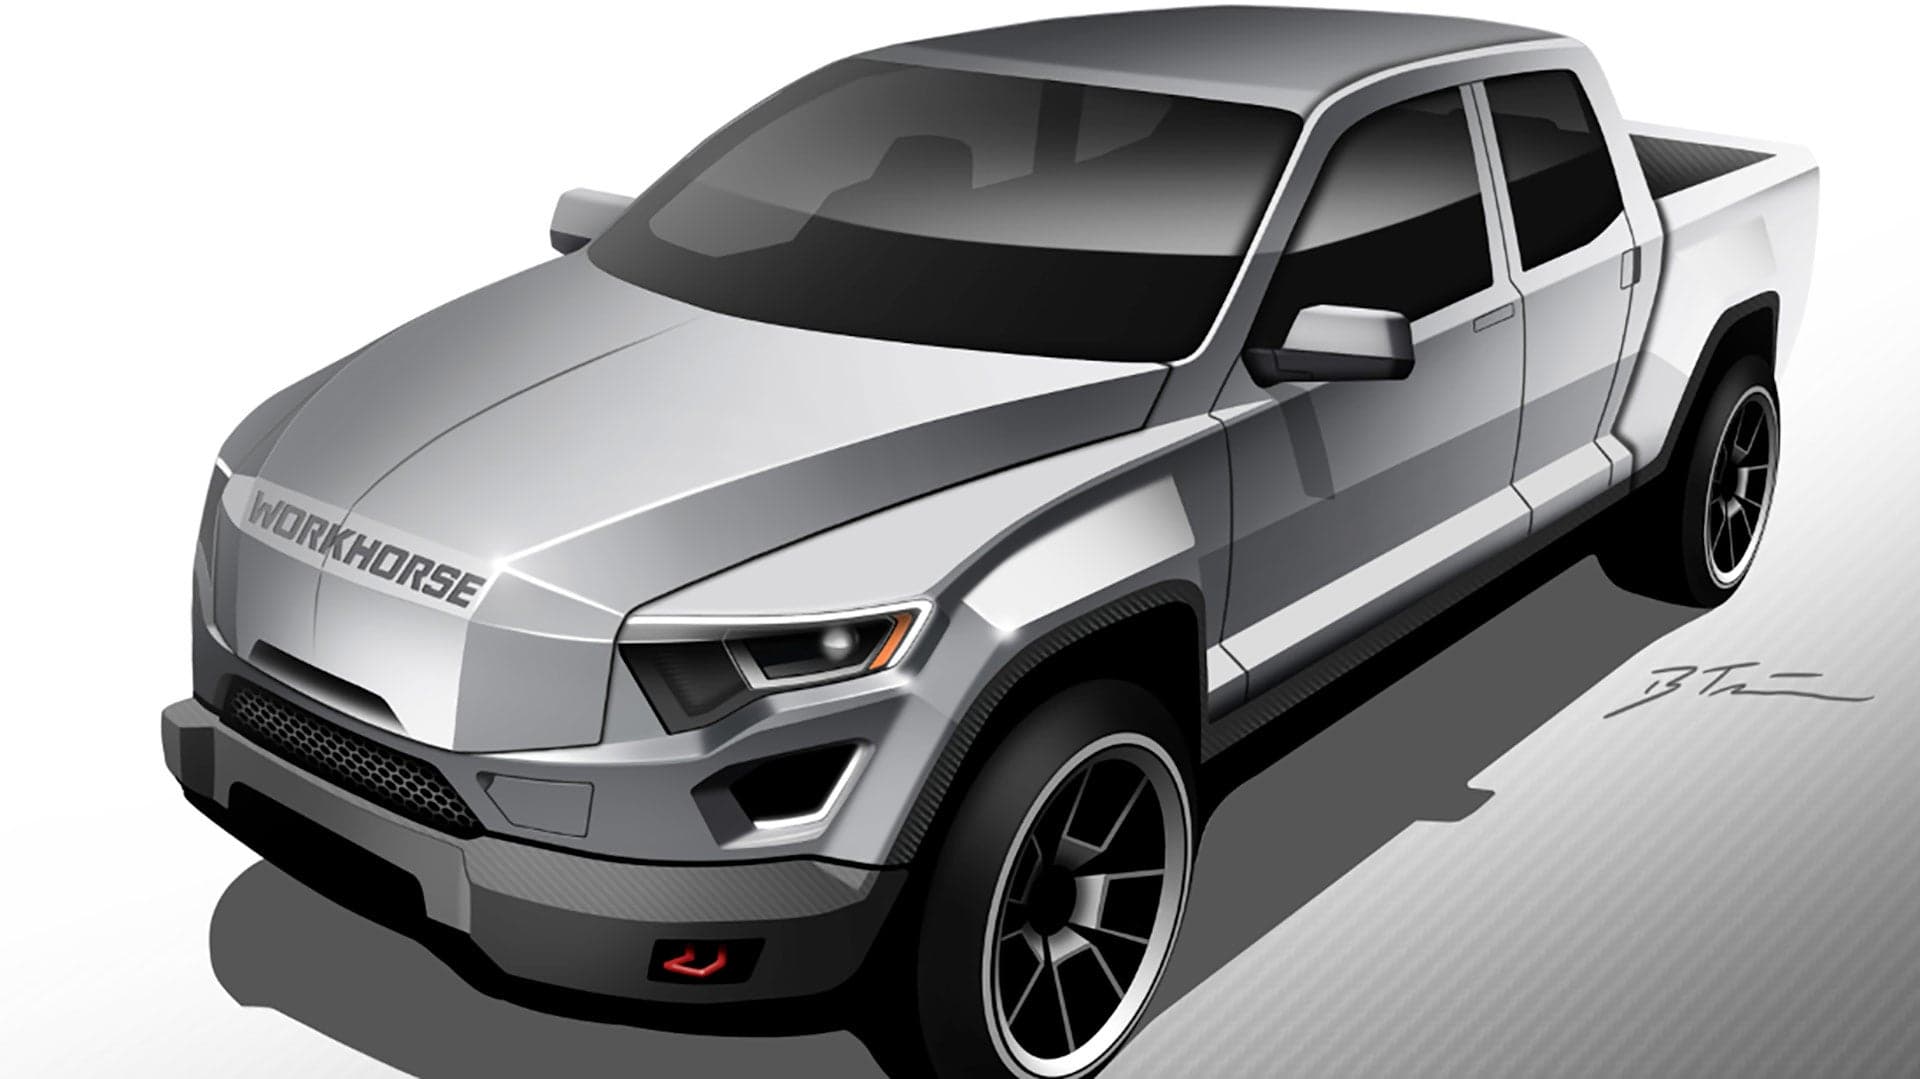 Workhorse Plans an Electric Pickup and a Buick Regal Wagon Nears Production: The Evening Rush